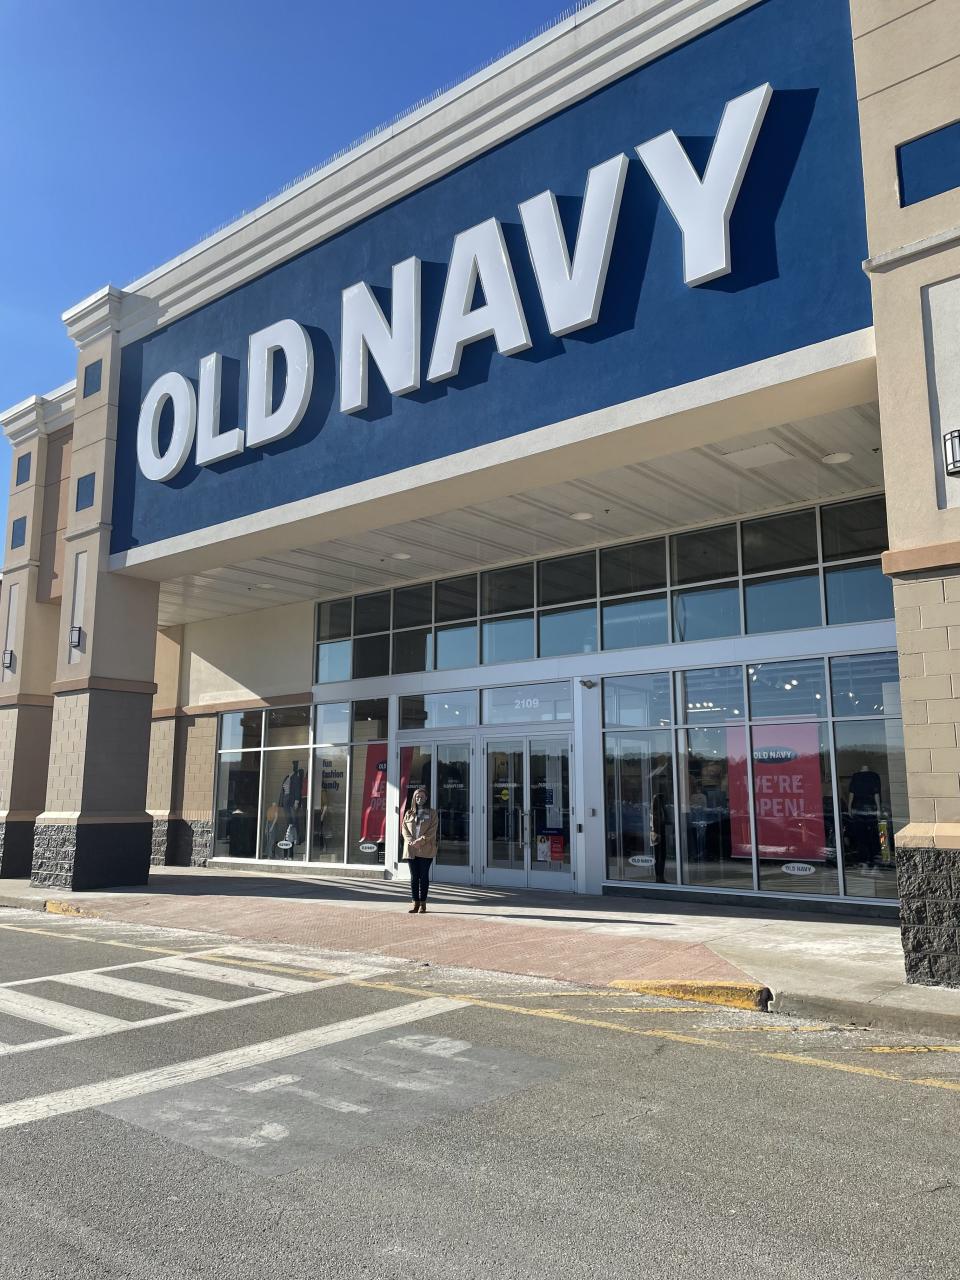 Old Navy, a retailer known for its wide variety of clothing items, is set to open its doors at The Center at Hobbs Brook retail plaza in Sturbridge Feb. 4.